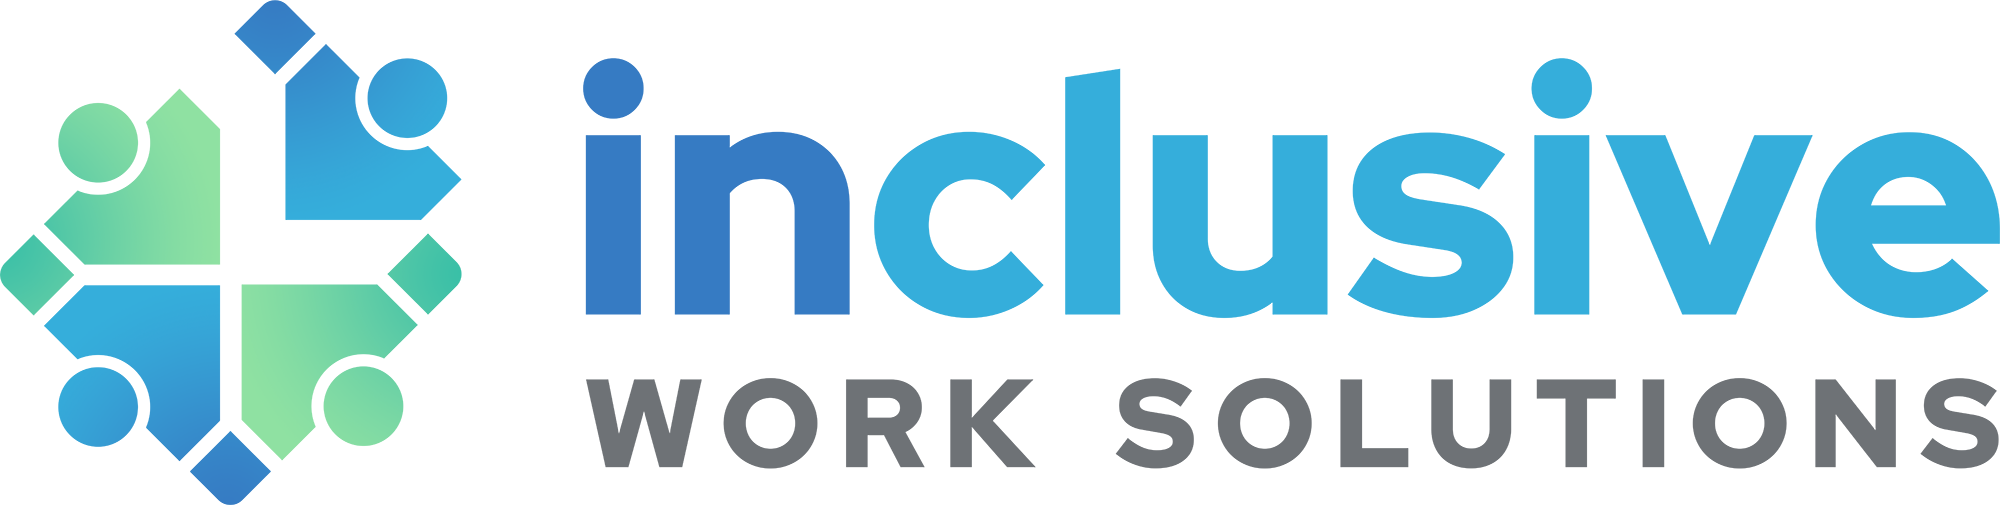 Inclusive Work Solutions logo created by Perfectly Pitched